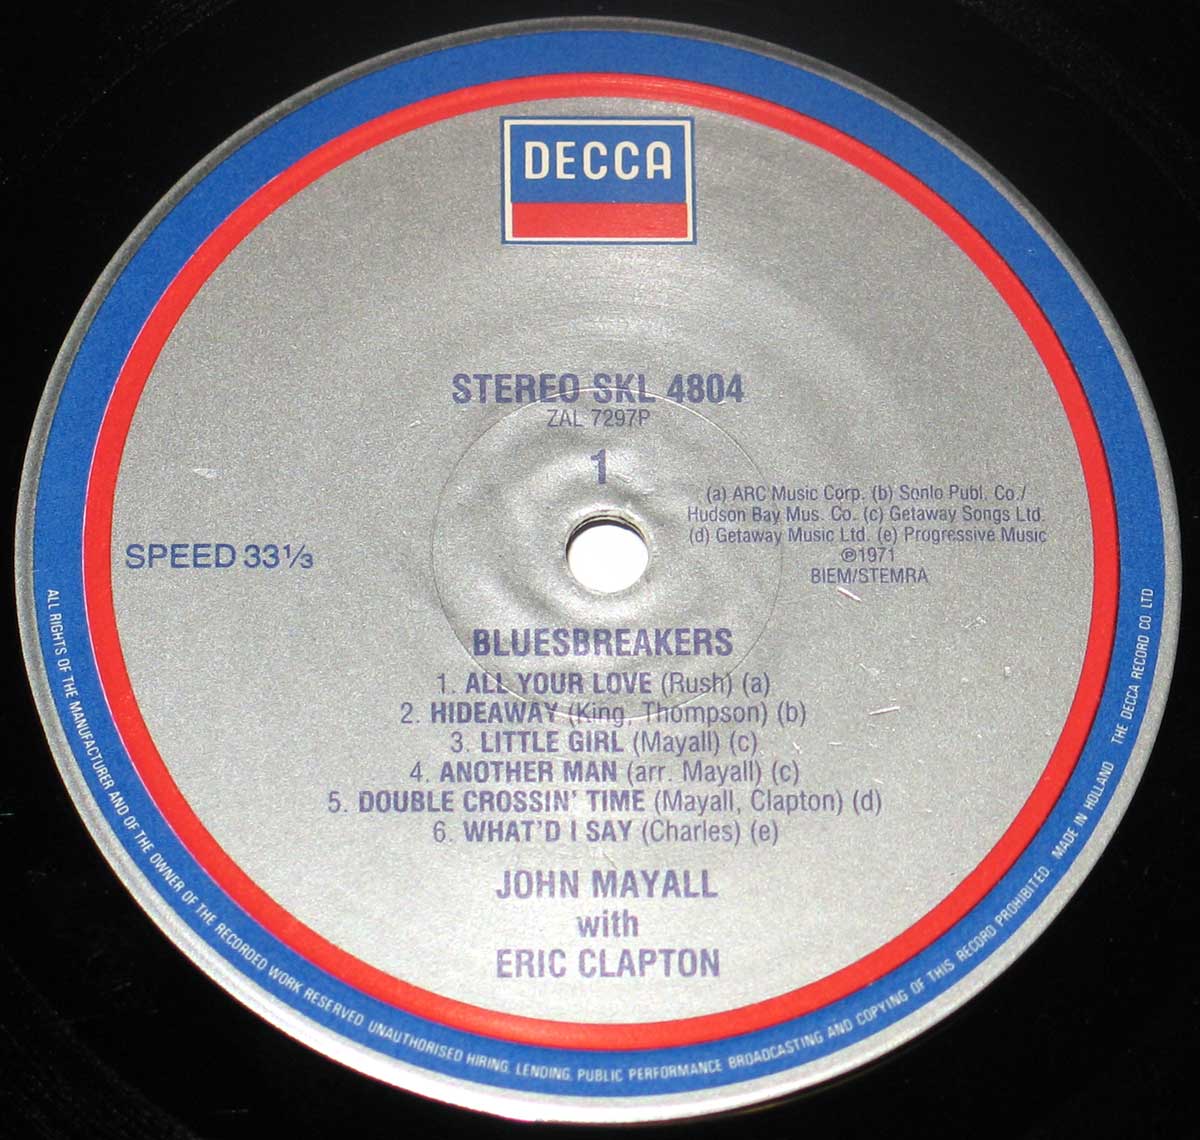 Close up of the Red, Blue and Grey "Decca" Record label of John Mayall Blues Breakers With Eric Clapton album